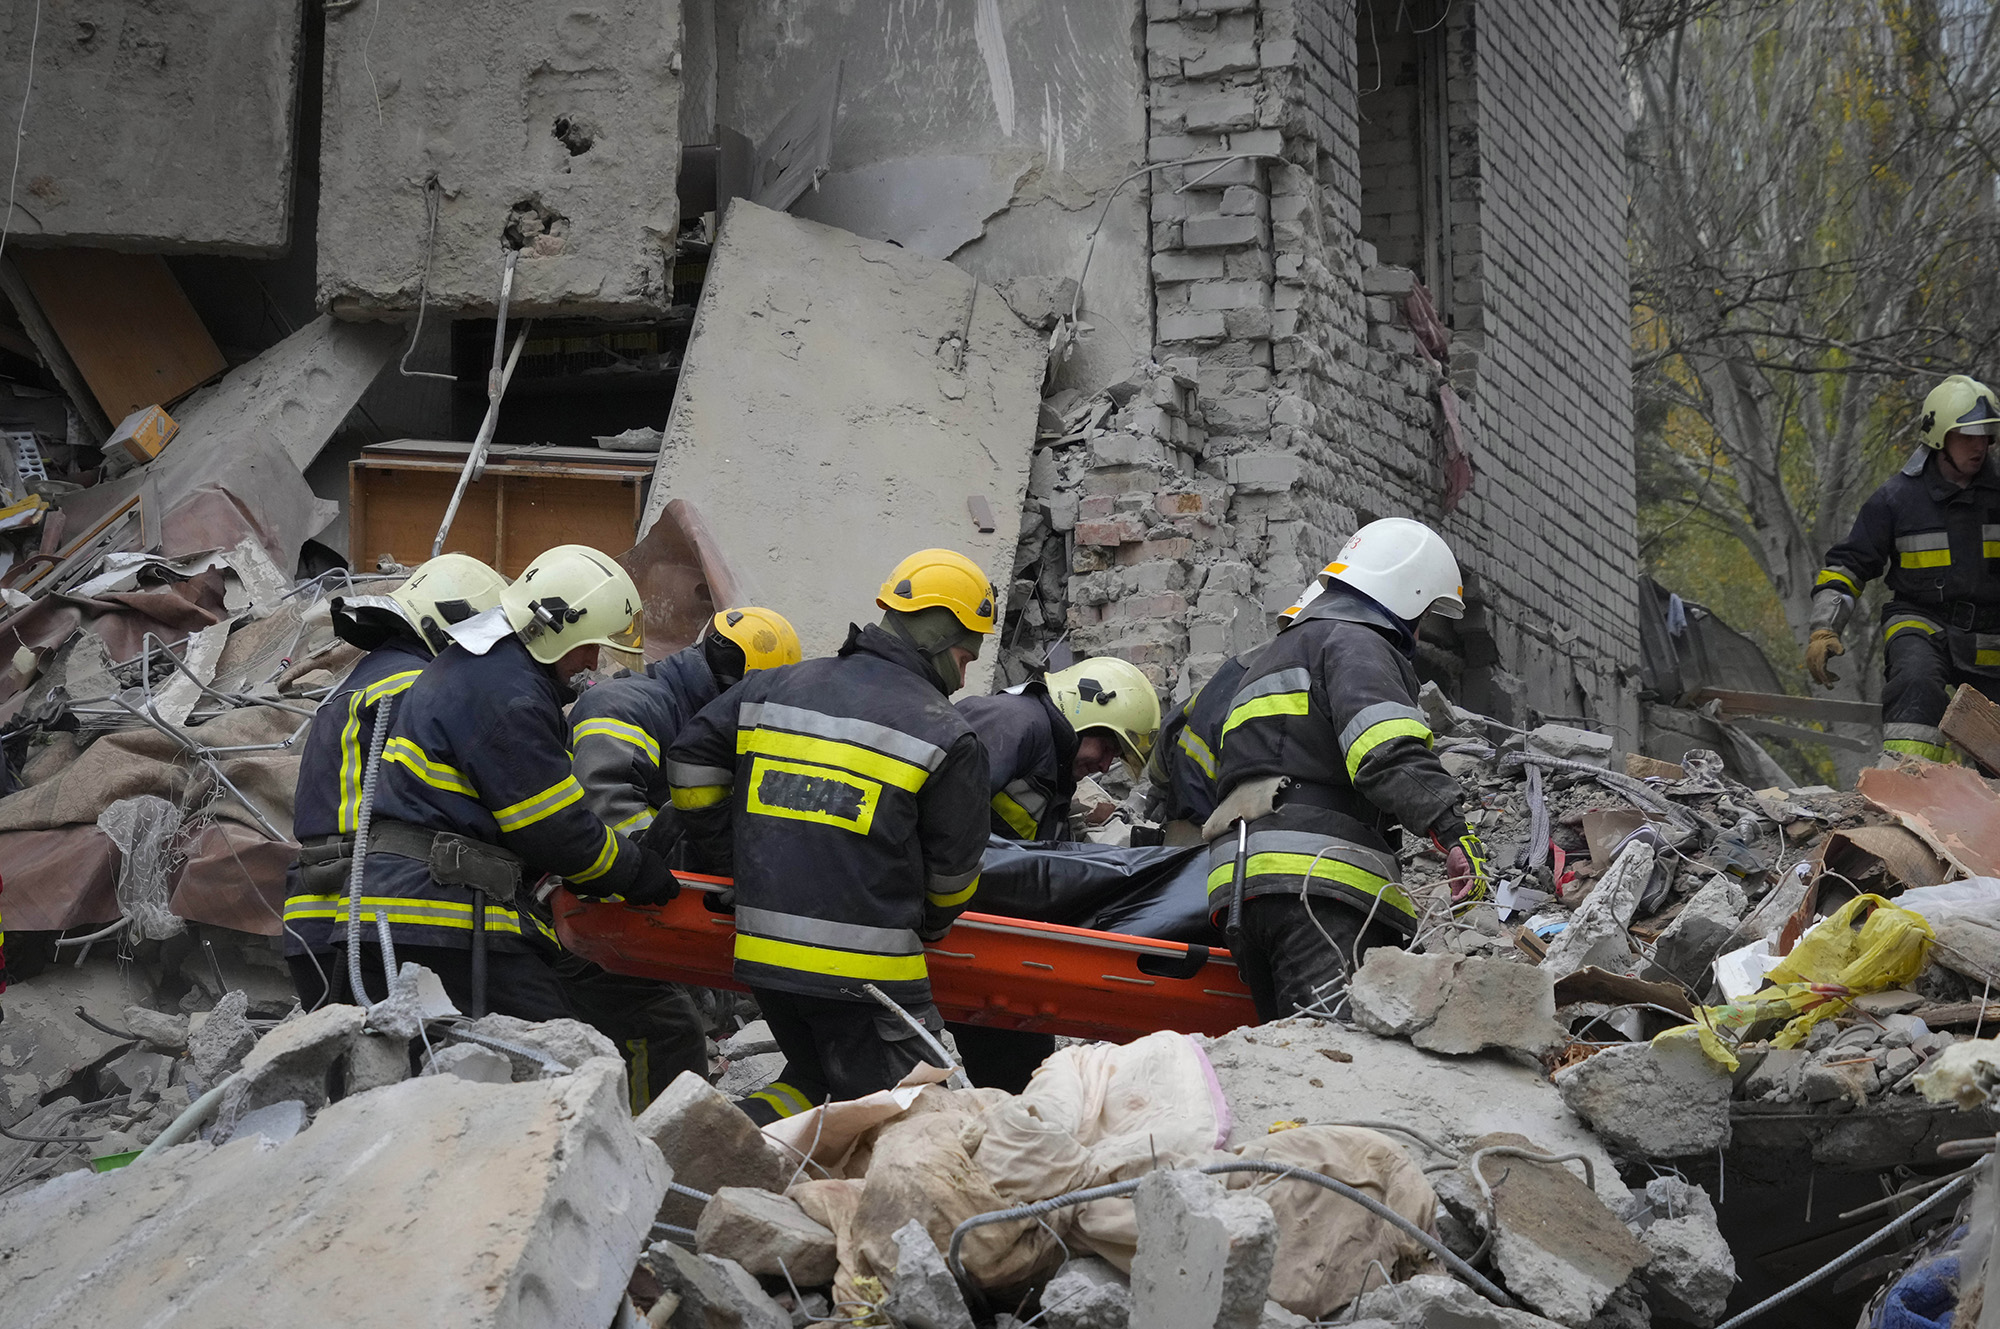 Ukrainian Emergency Service rescuers carry a body found under rubble at the scene of shelling in Mykolaiv, Ukraine, on November 11.